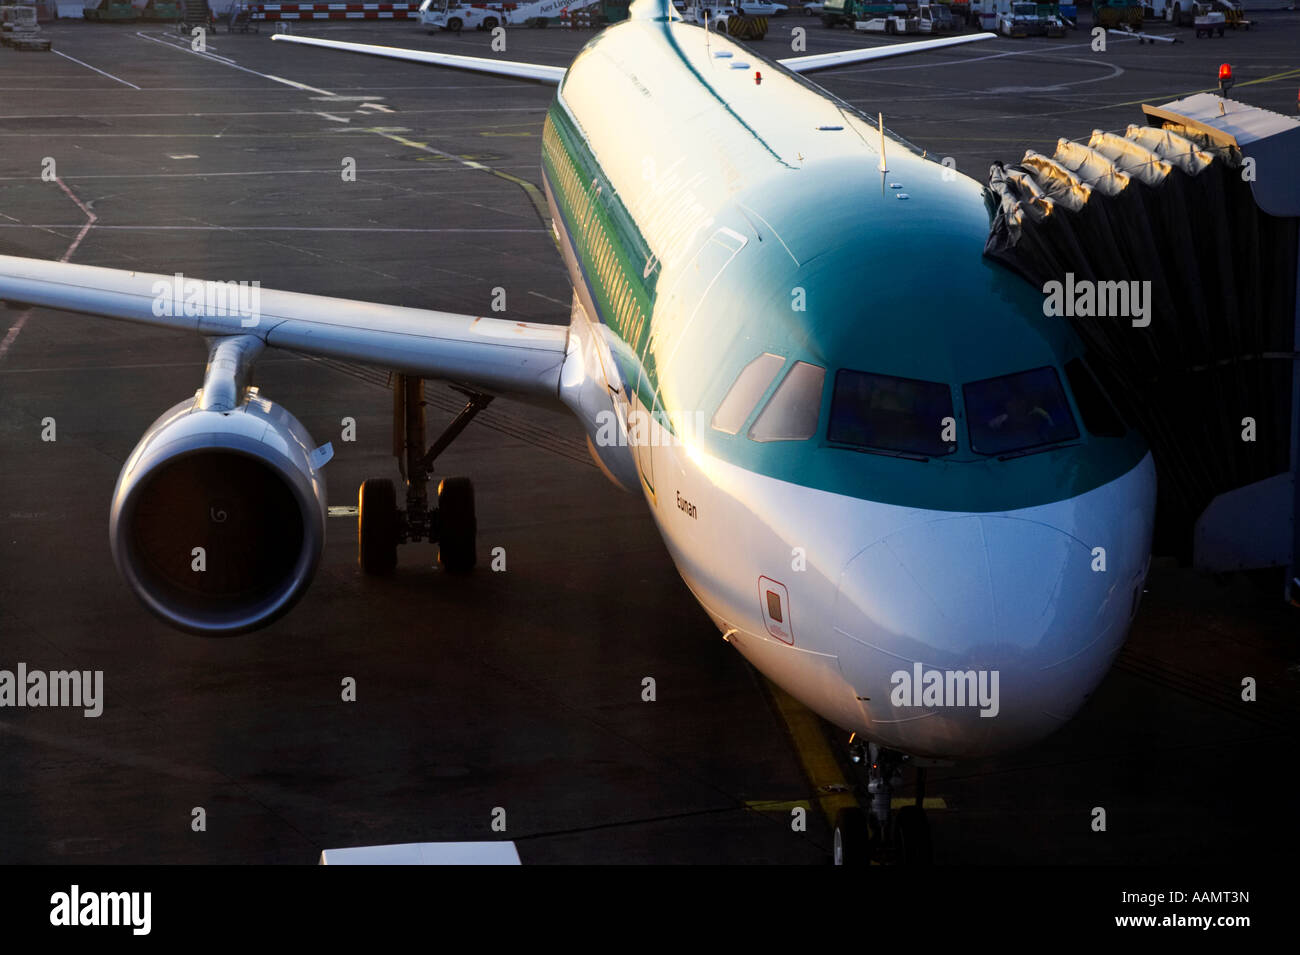 Aer Lingus Airbus A320 214 Eunan sitting at dublin airport in the evening with passenger airway walkway attached Stock Photo